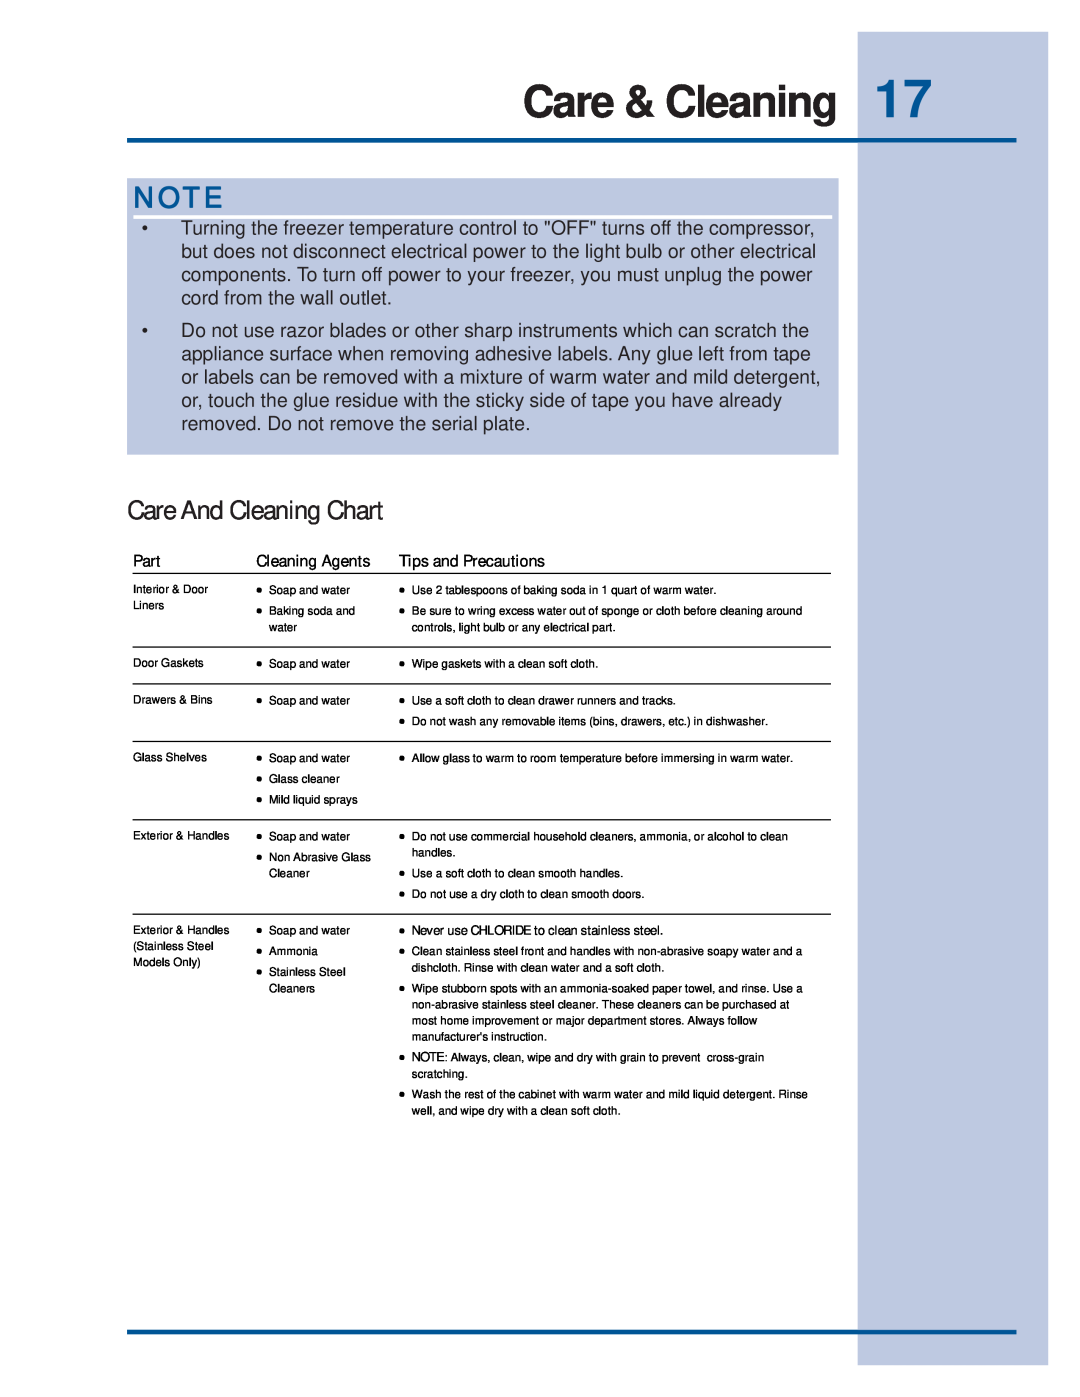 Electrolux Refrigerator manual Care And Cleaning Chart, Care & Cleaning 